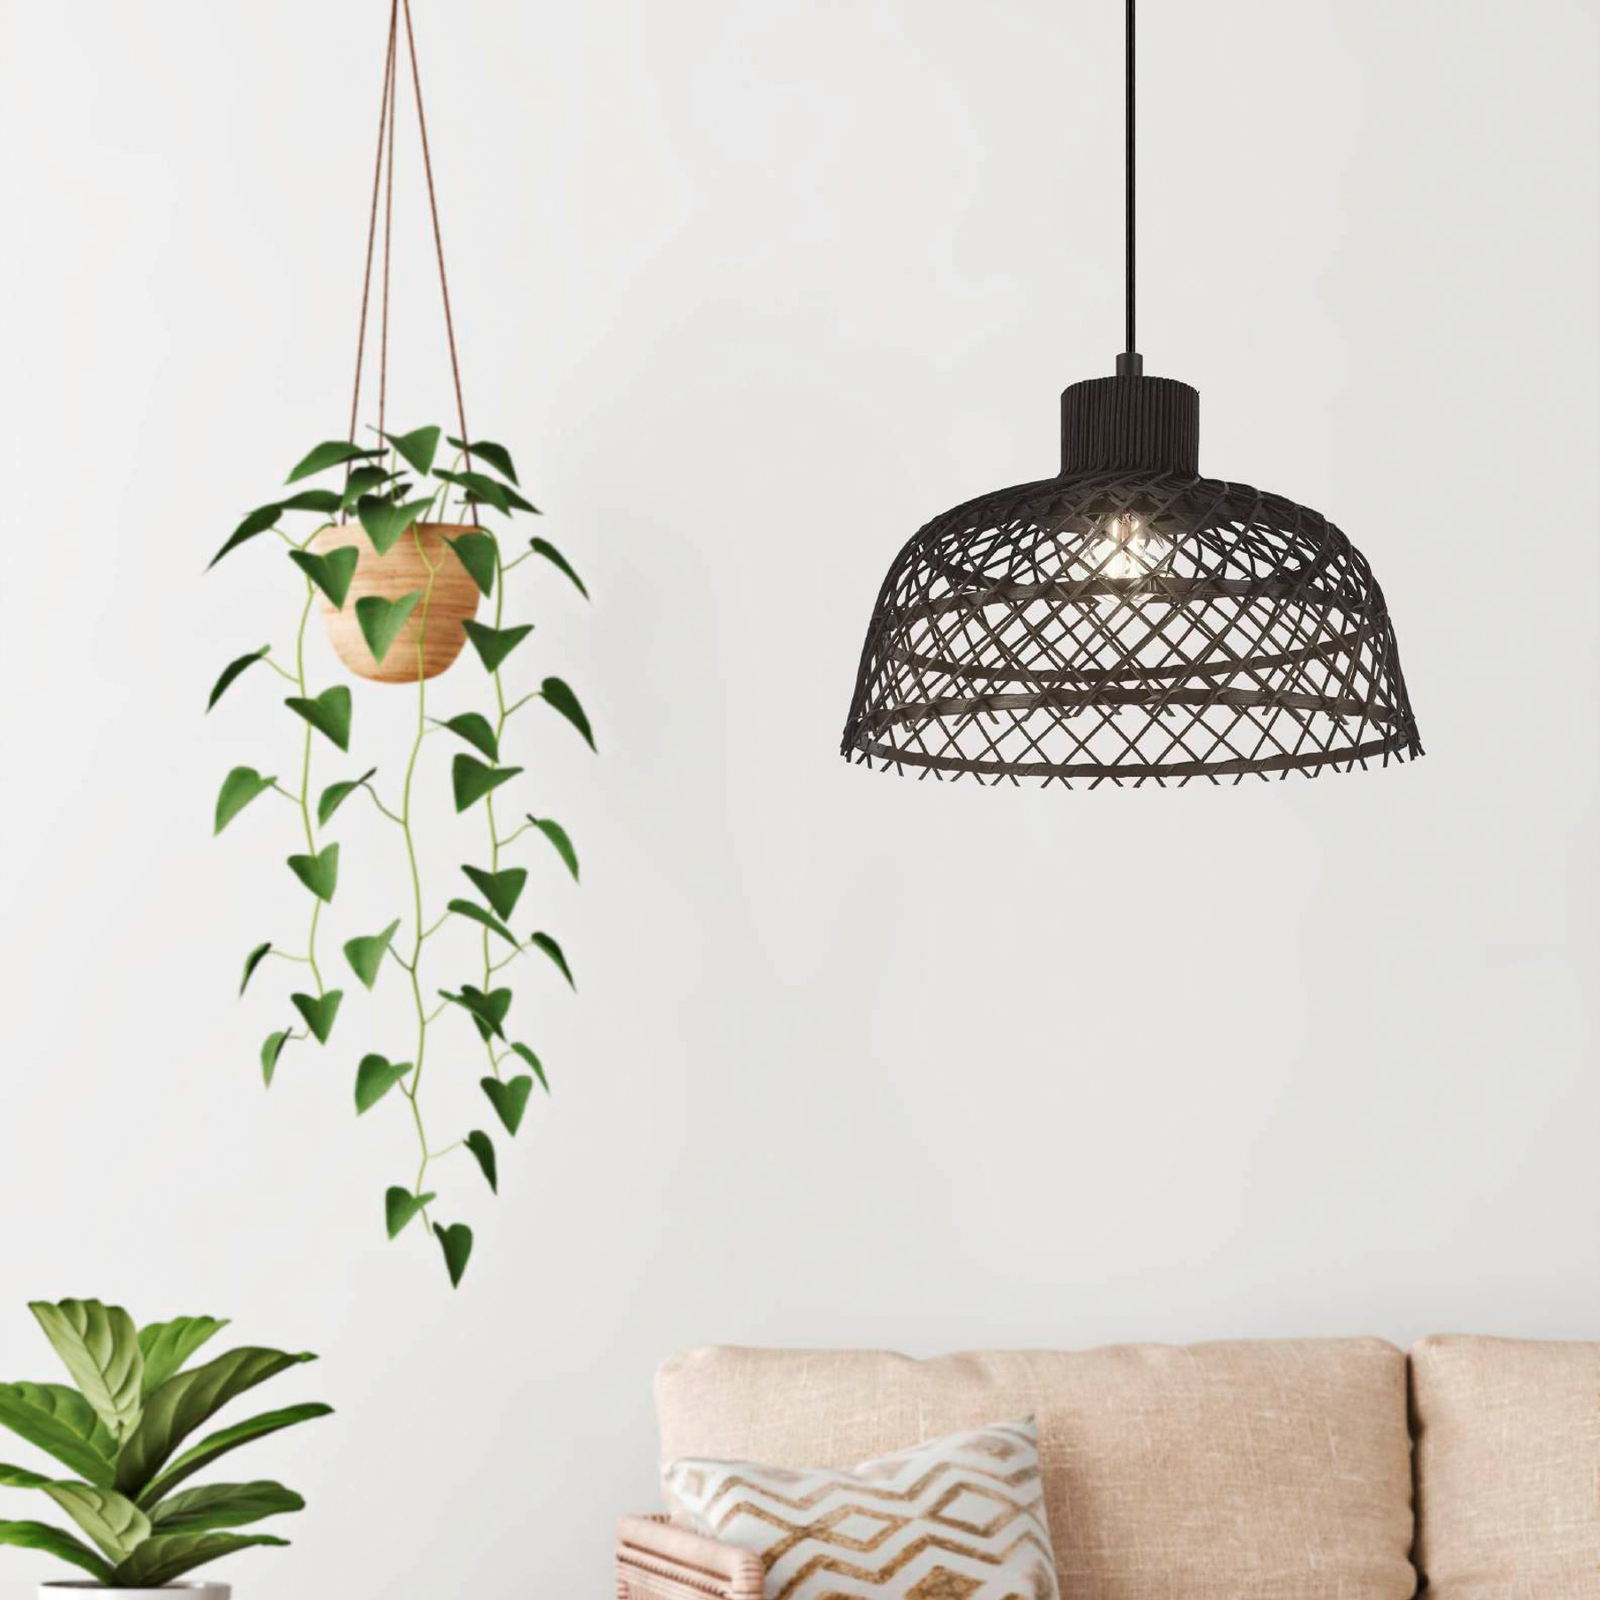 Ausnby hanging light made of wood, black